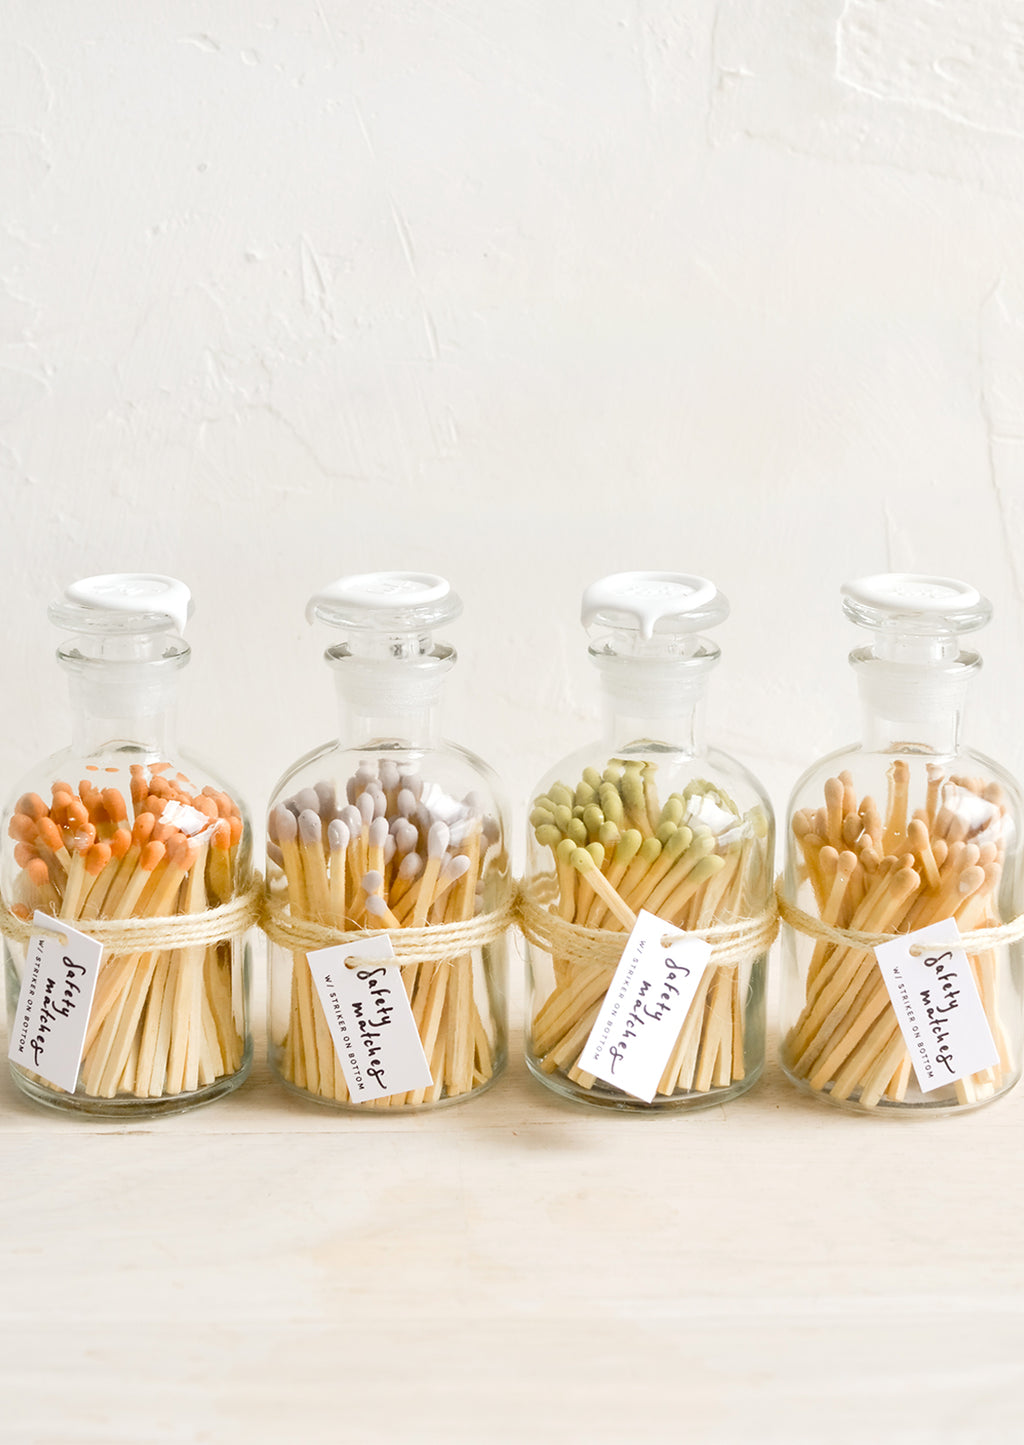 2: Safety matches in vintage style glass apothecary jars, with four match tip color options.